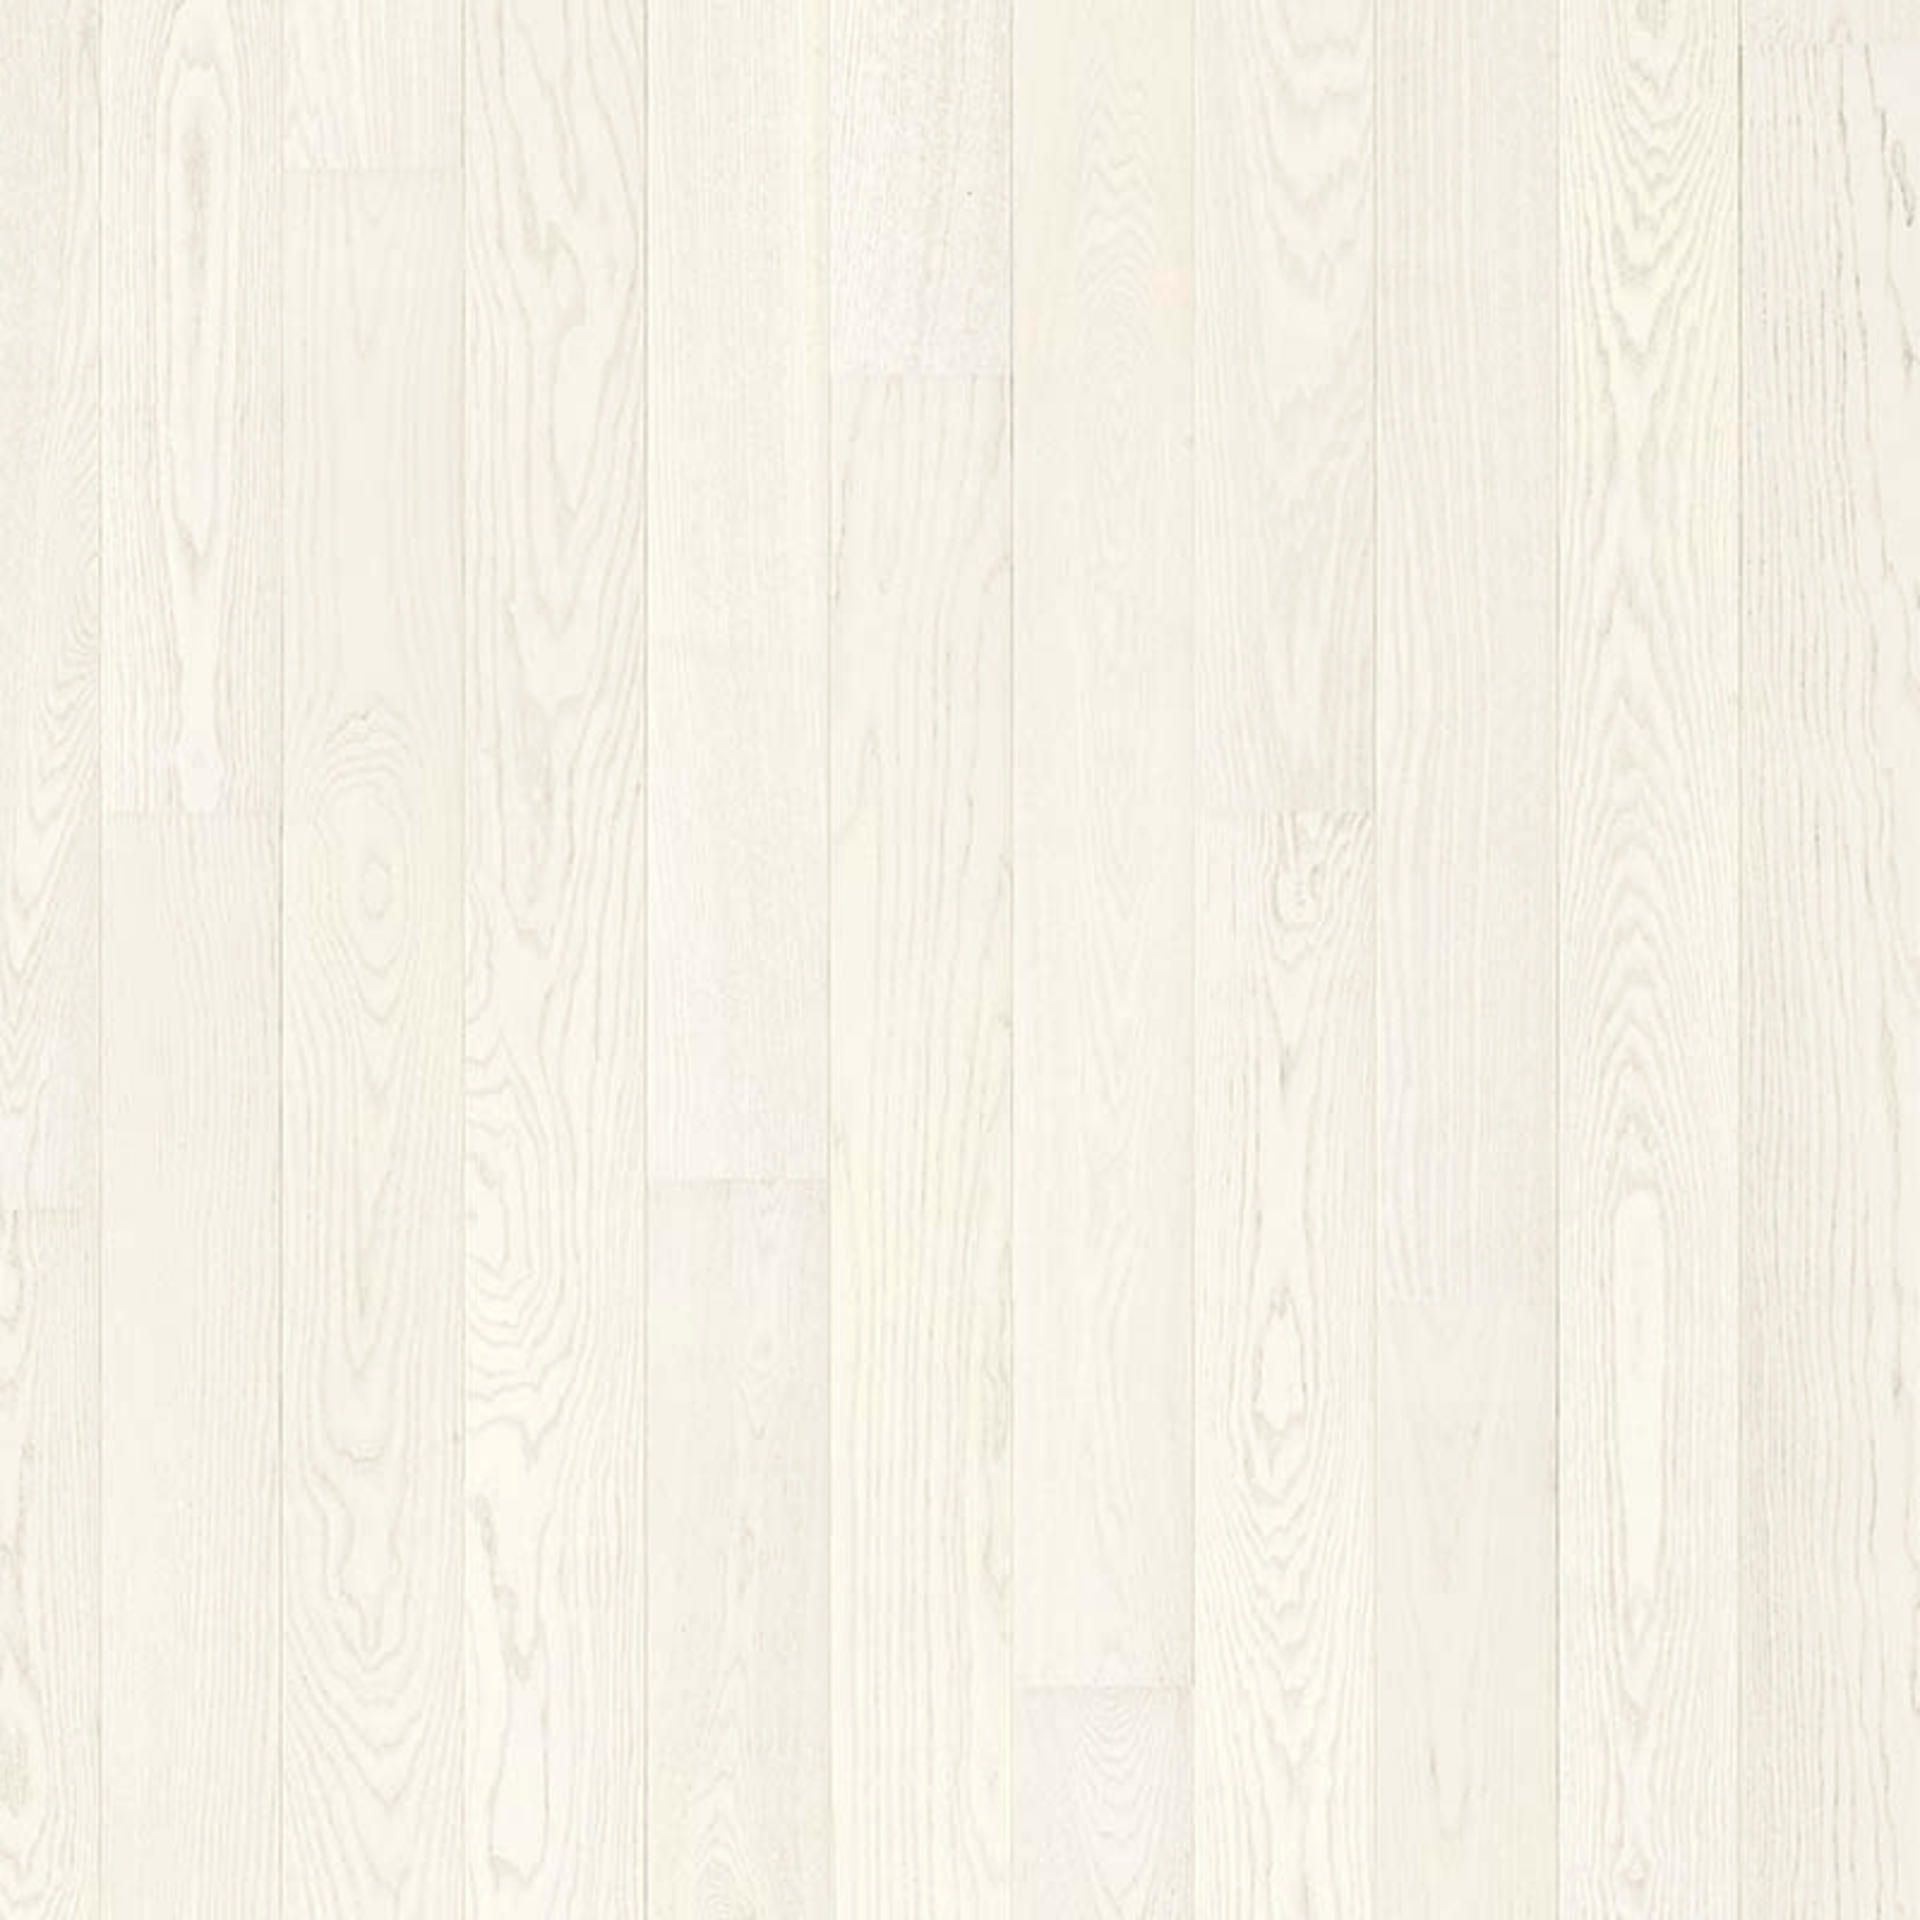 Holzboden Esche Ivory 1 Stab MADRID-TB15 Planke 162 x 2000 mm